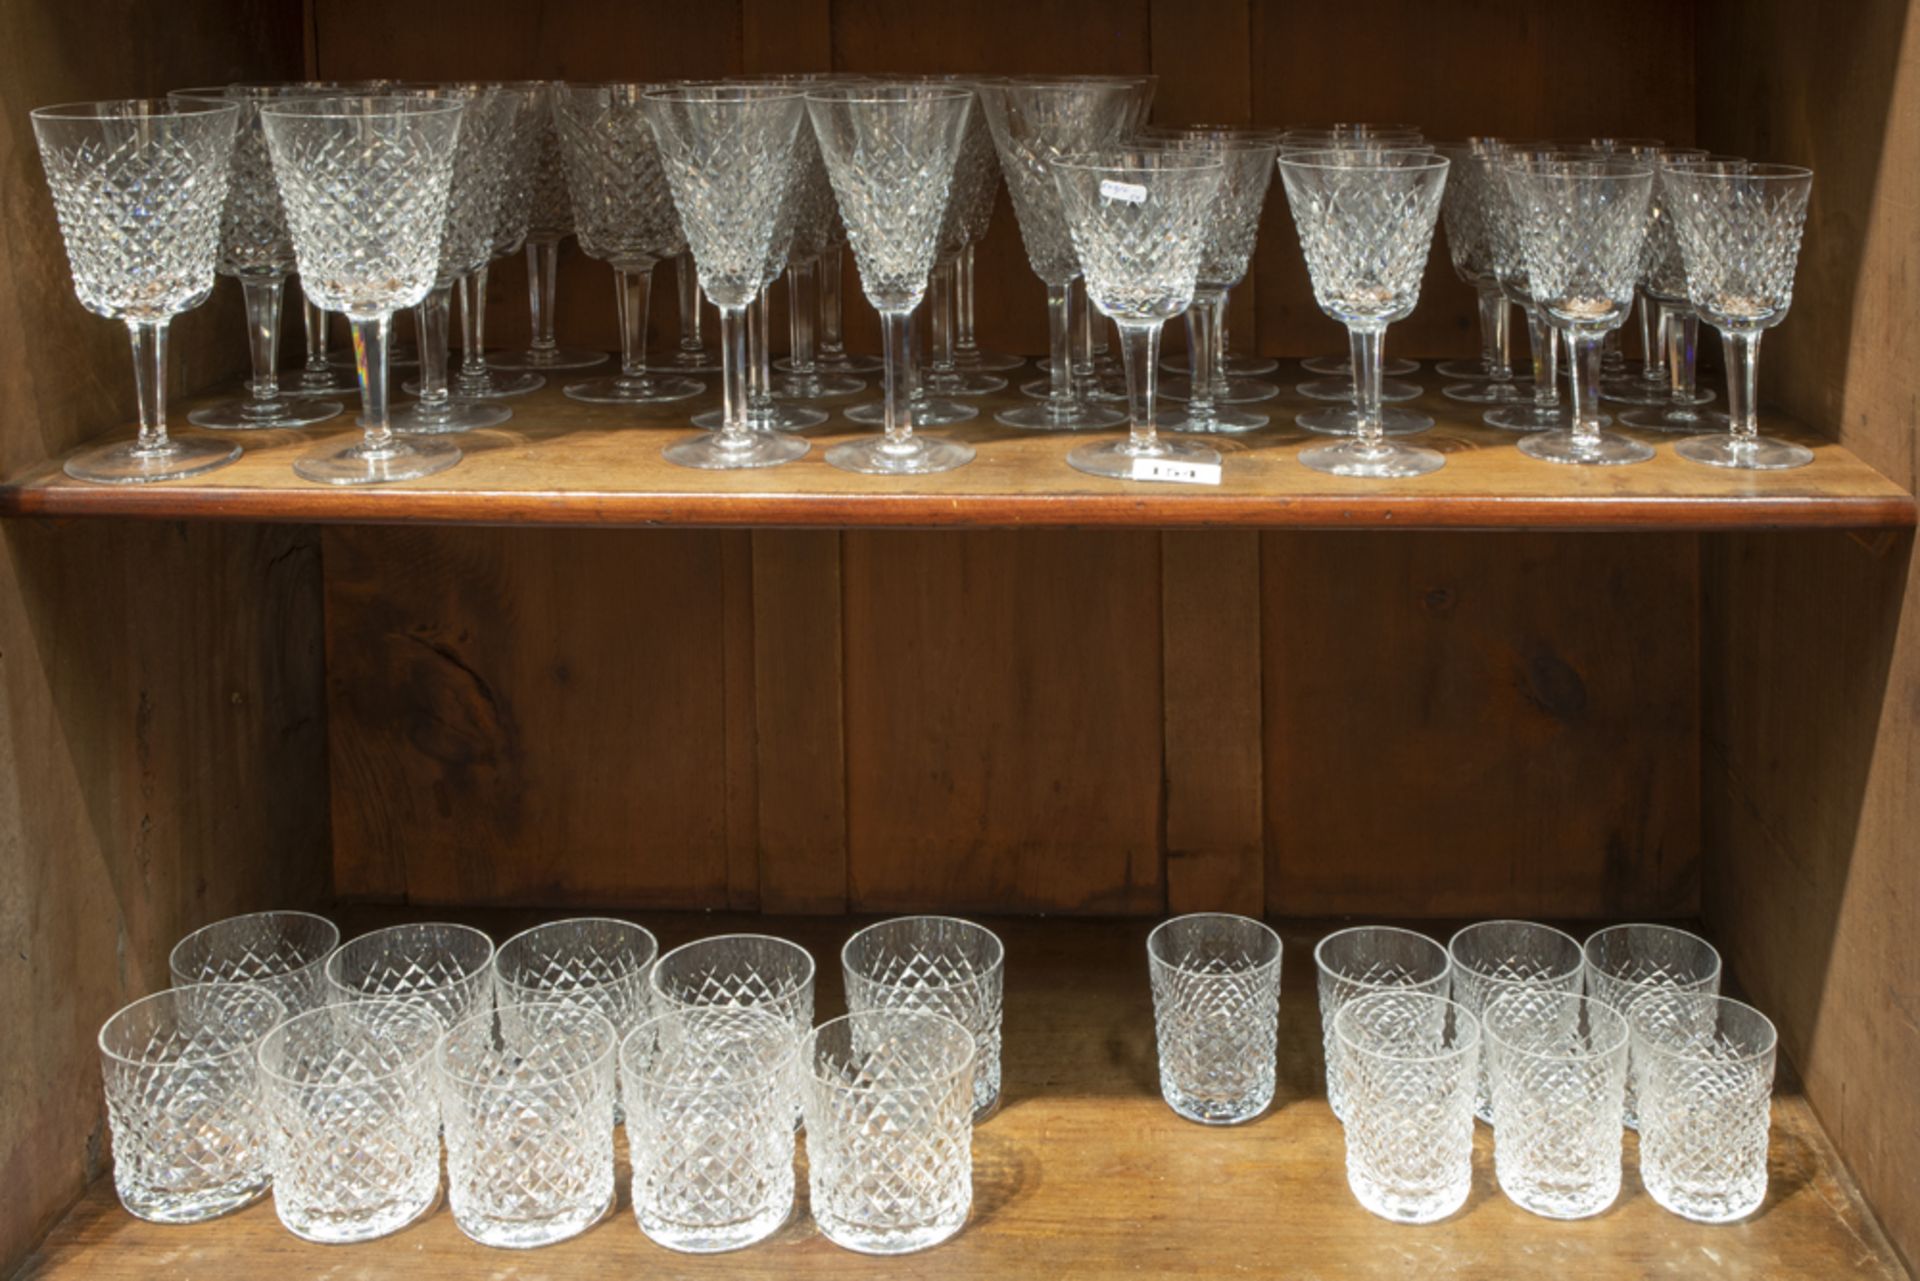 French set of 54 glasses in "Christofle" marked crystal || CHRISTOFLE 54-delig glasservies in - Bild 2 aus 2